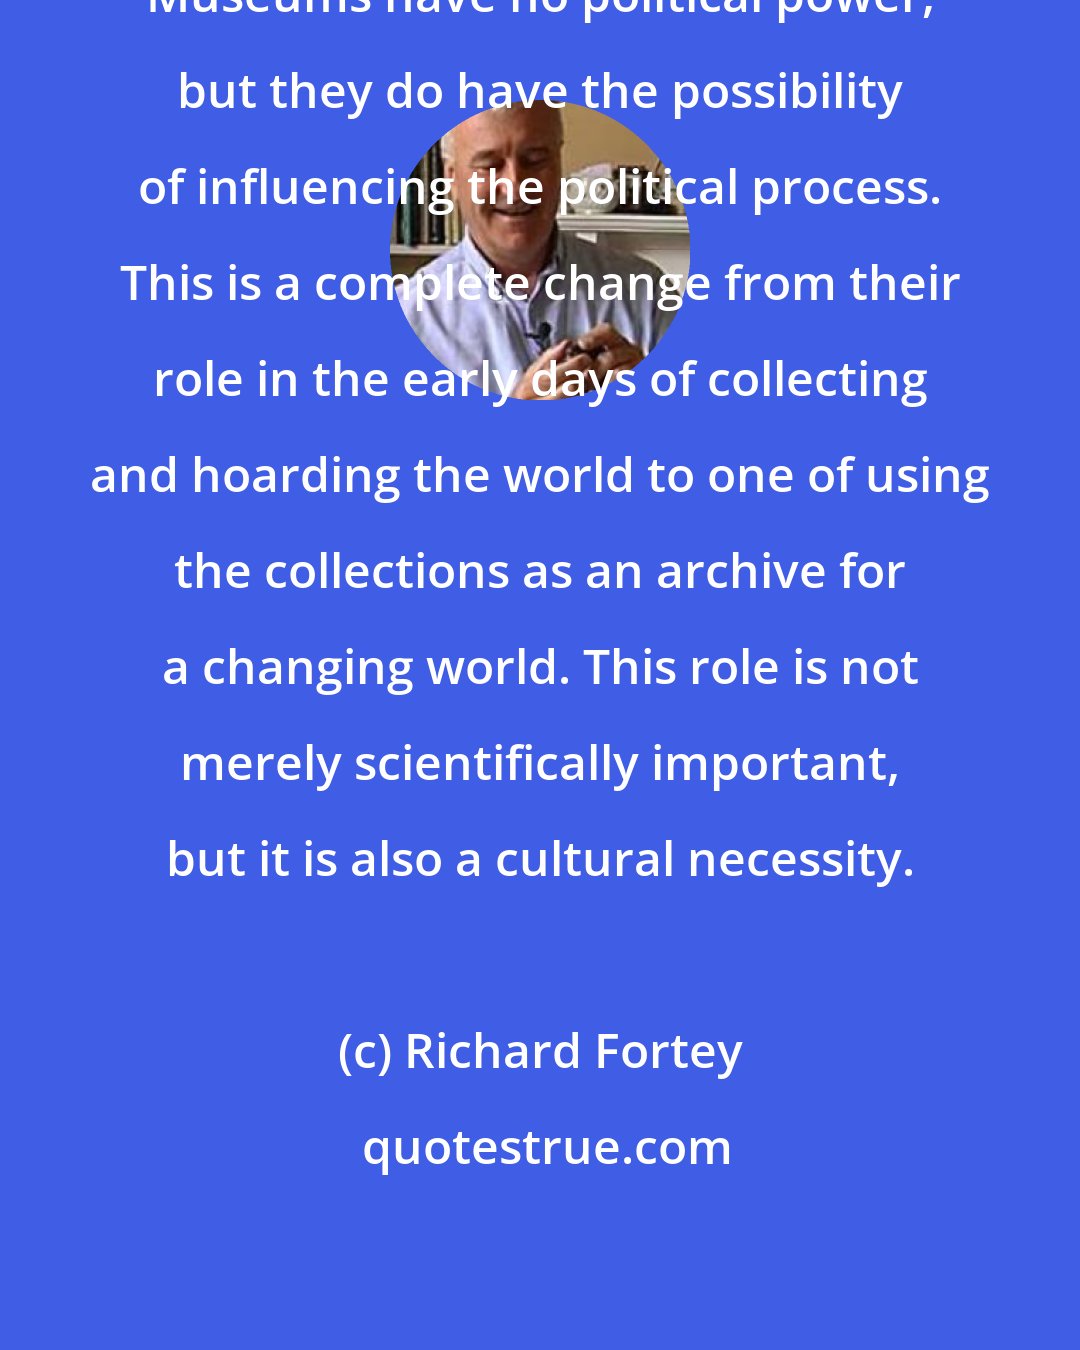 Richard Fortey: Museums have no political power, but they do have the possibility of influencing the political process. This is a complete change from their role in the early days of collecting and hoarding the world to one of using the collections as an archive for a changing world. This role is not merely scientifically important, but it is also a cultural necessity.